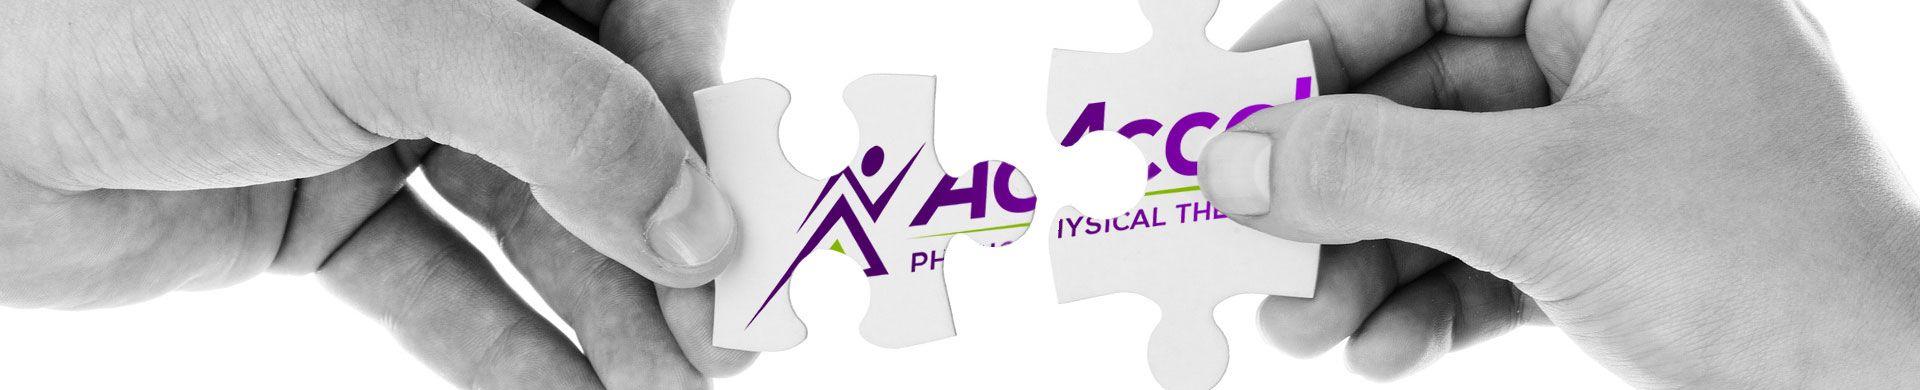 PT Month Logo - Accel Physical Therapy » Reflecting on National PT Month and the PT ...